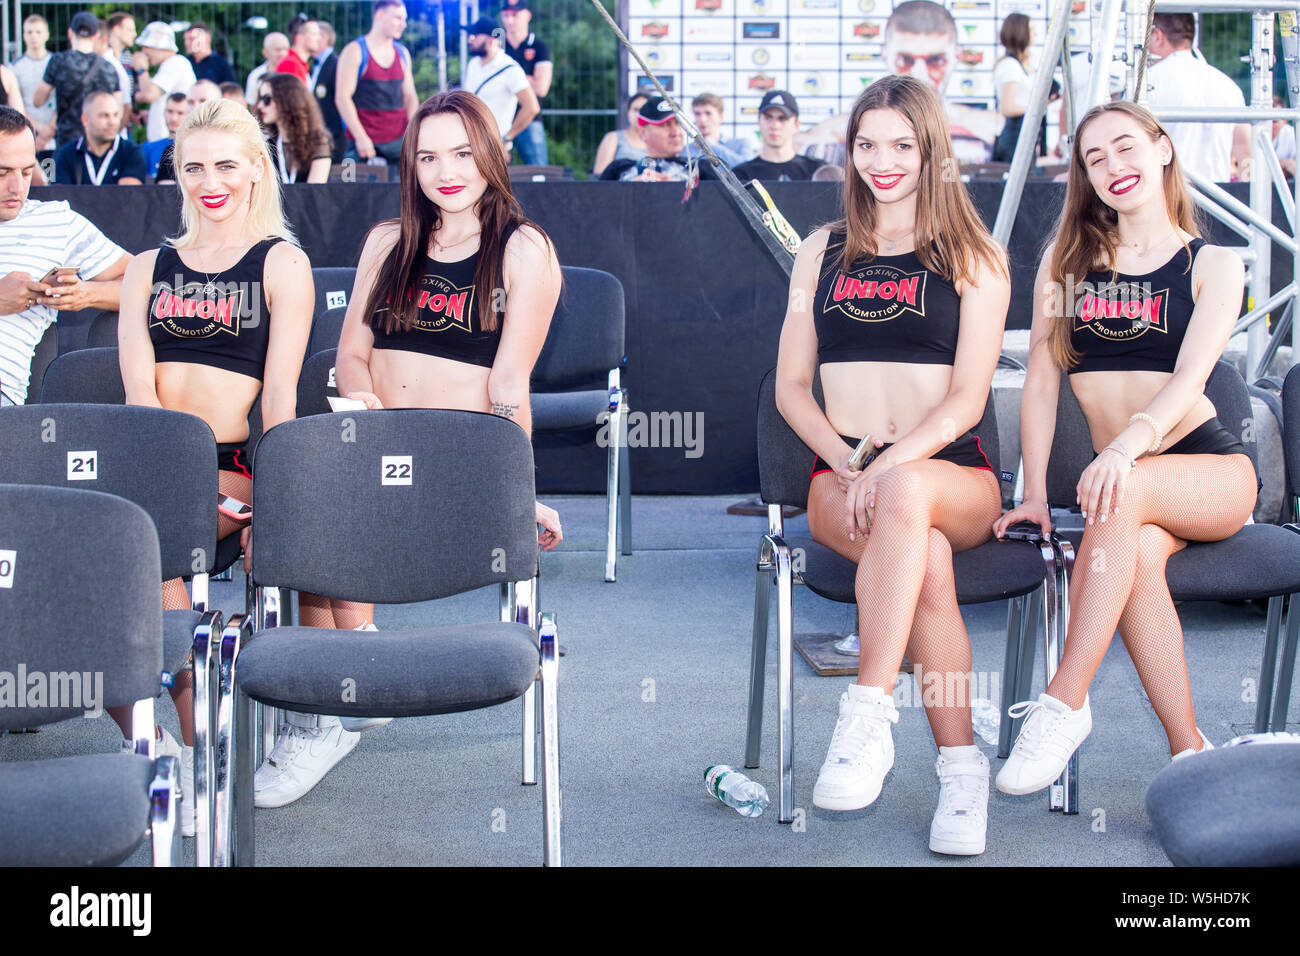 Ring card girls rest at ringside during a break between undercard fights at Kiev Parkovy Convention Artem Dalakian WBA Fly Weight world title defense. Stock Photo